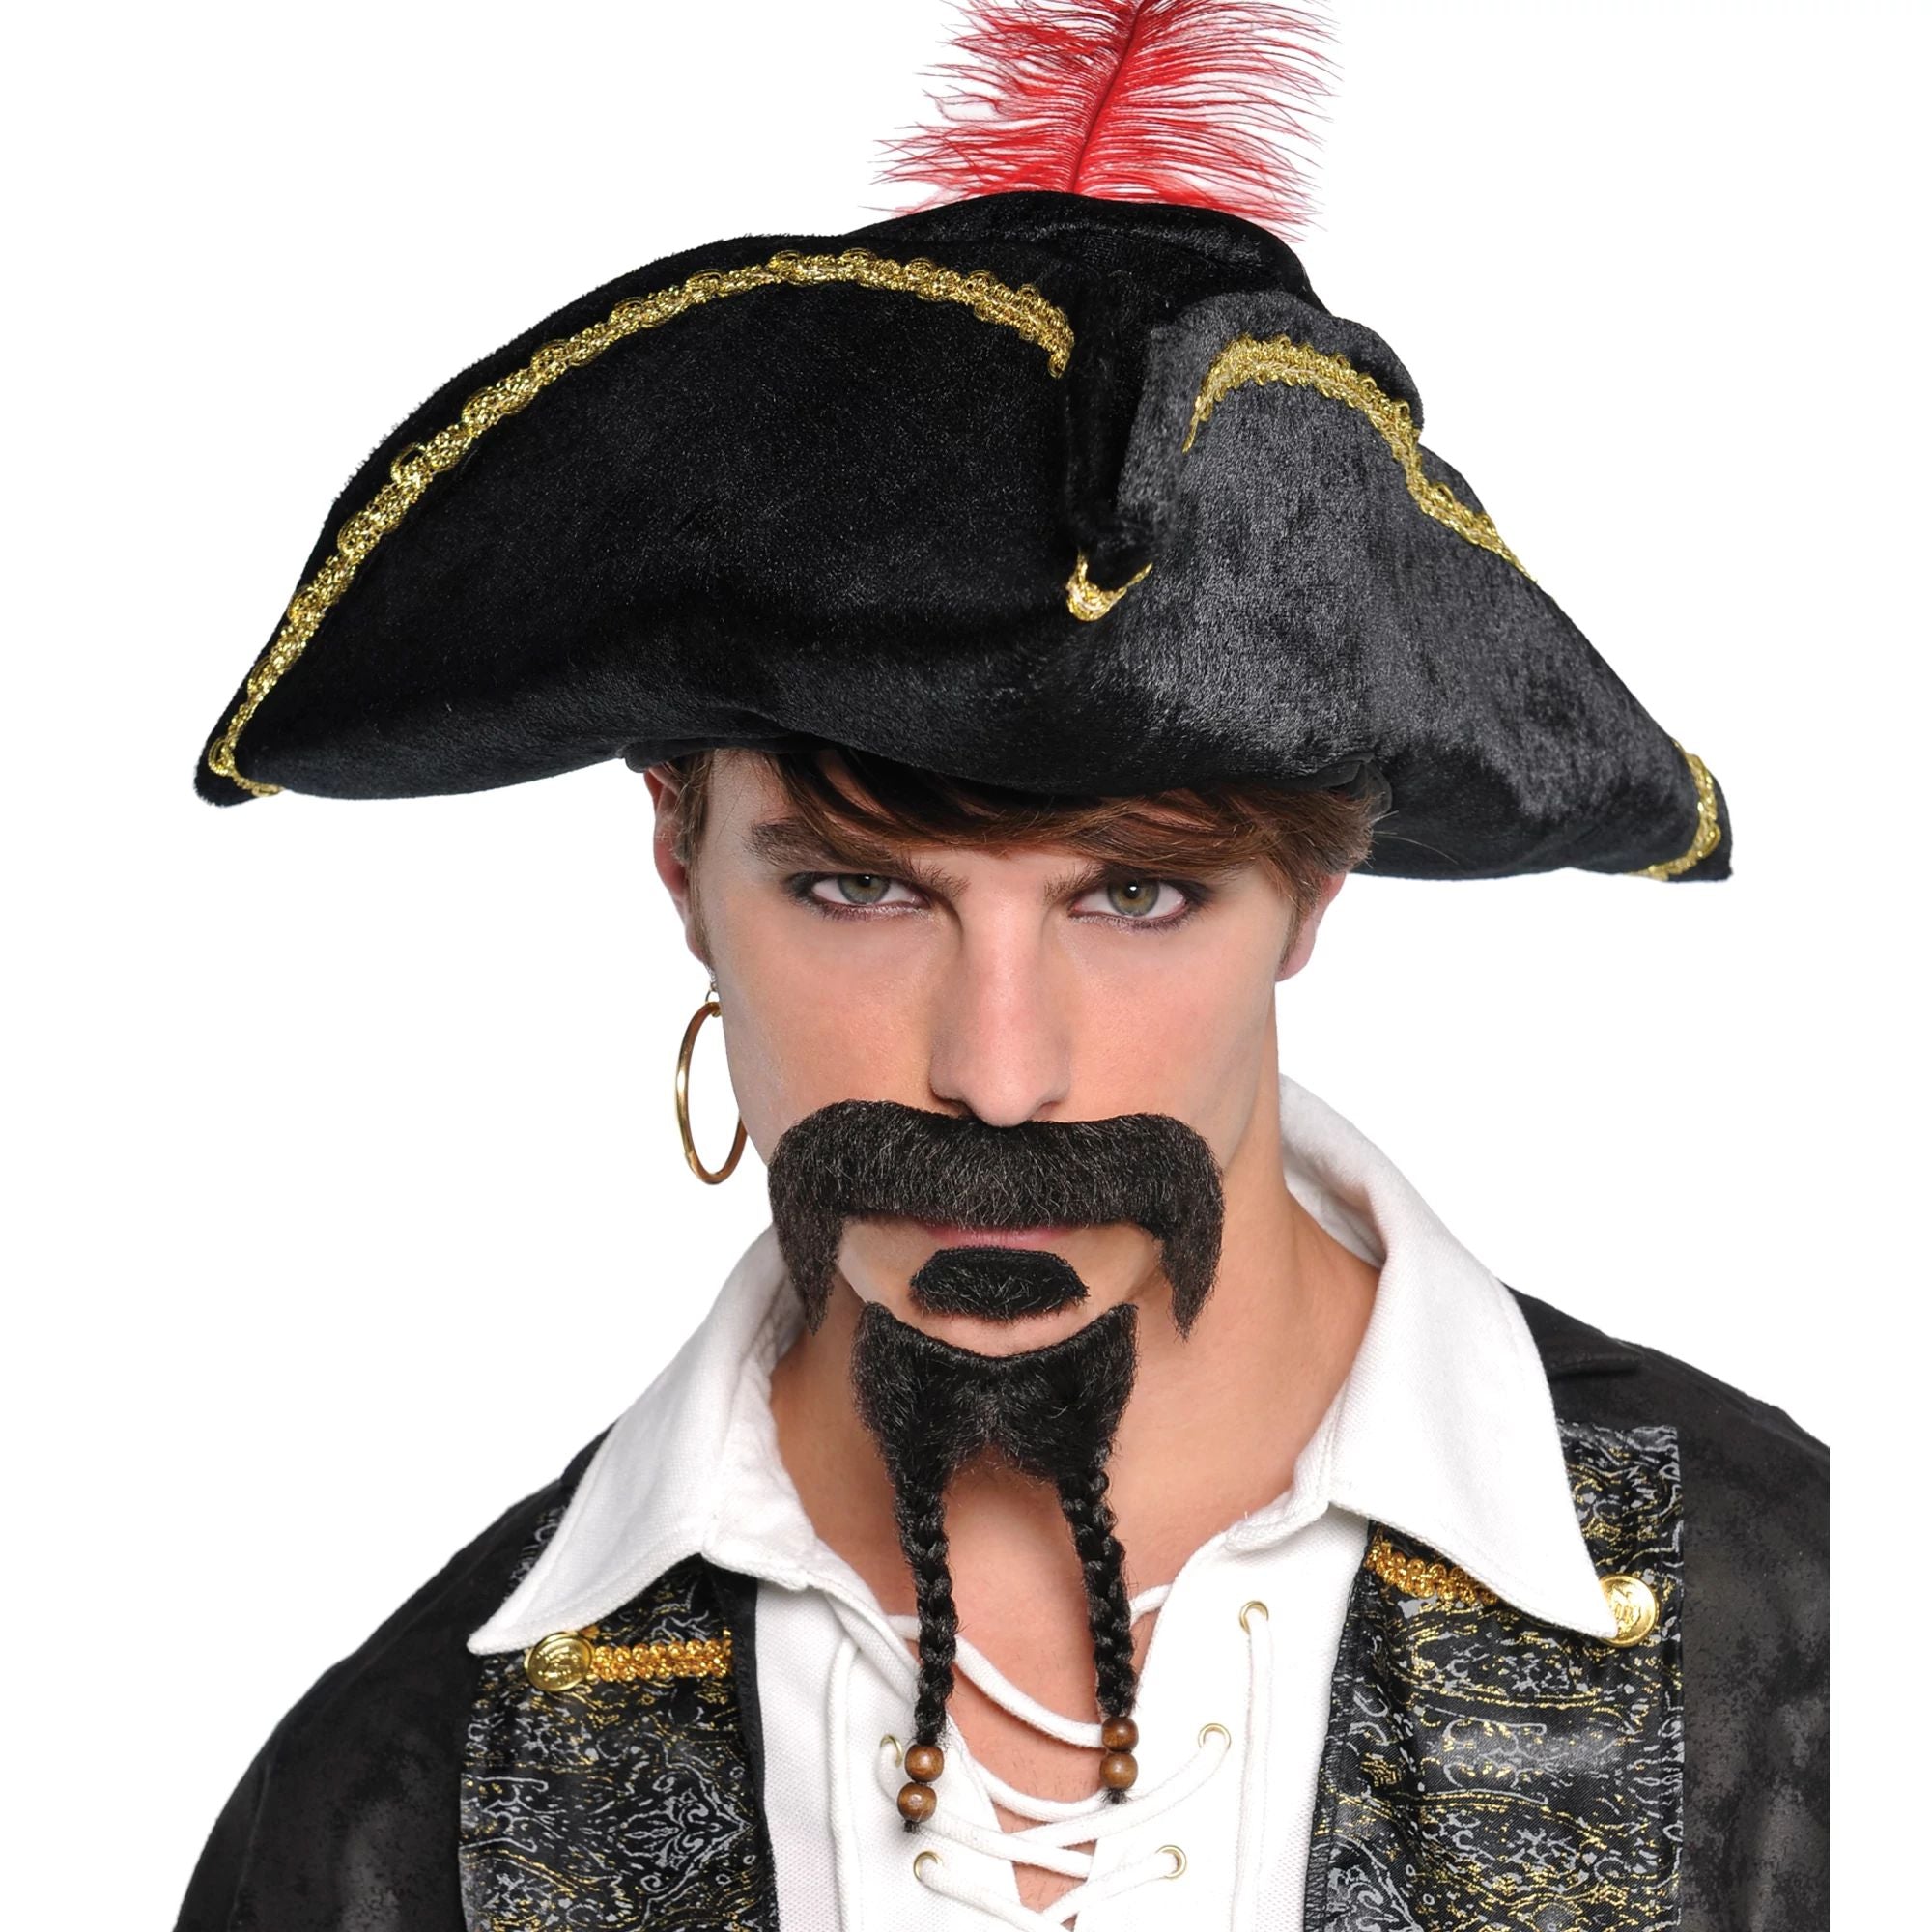 Amscan COSTUMES: ACCESSORIES Pirate Facial Hair Set - Adult